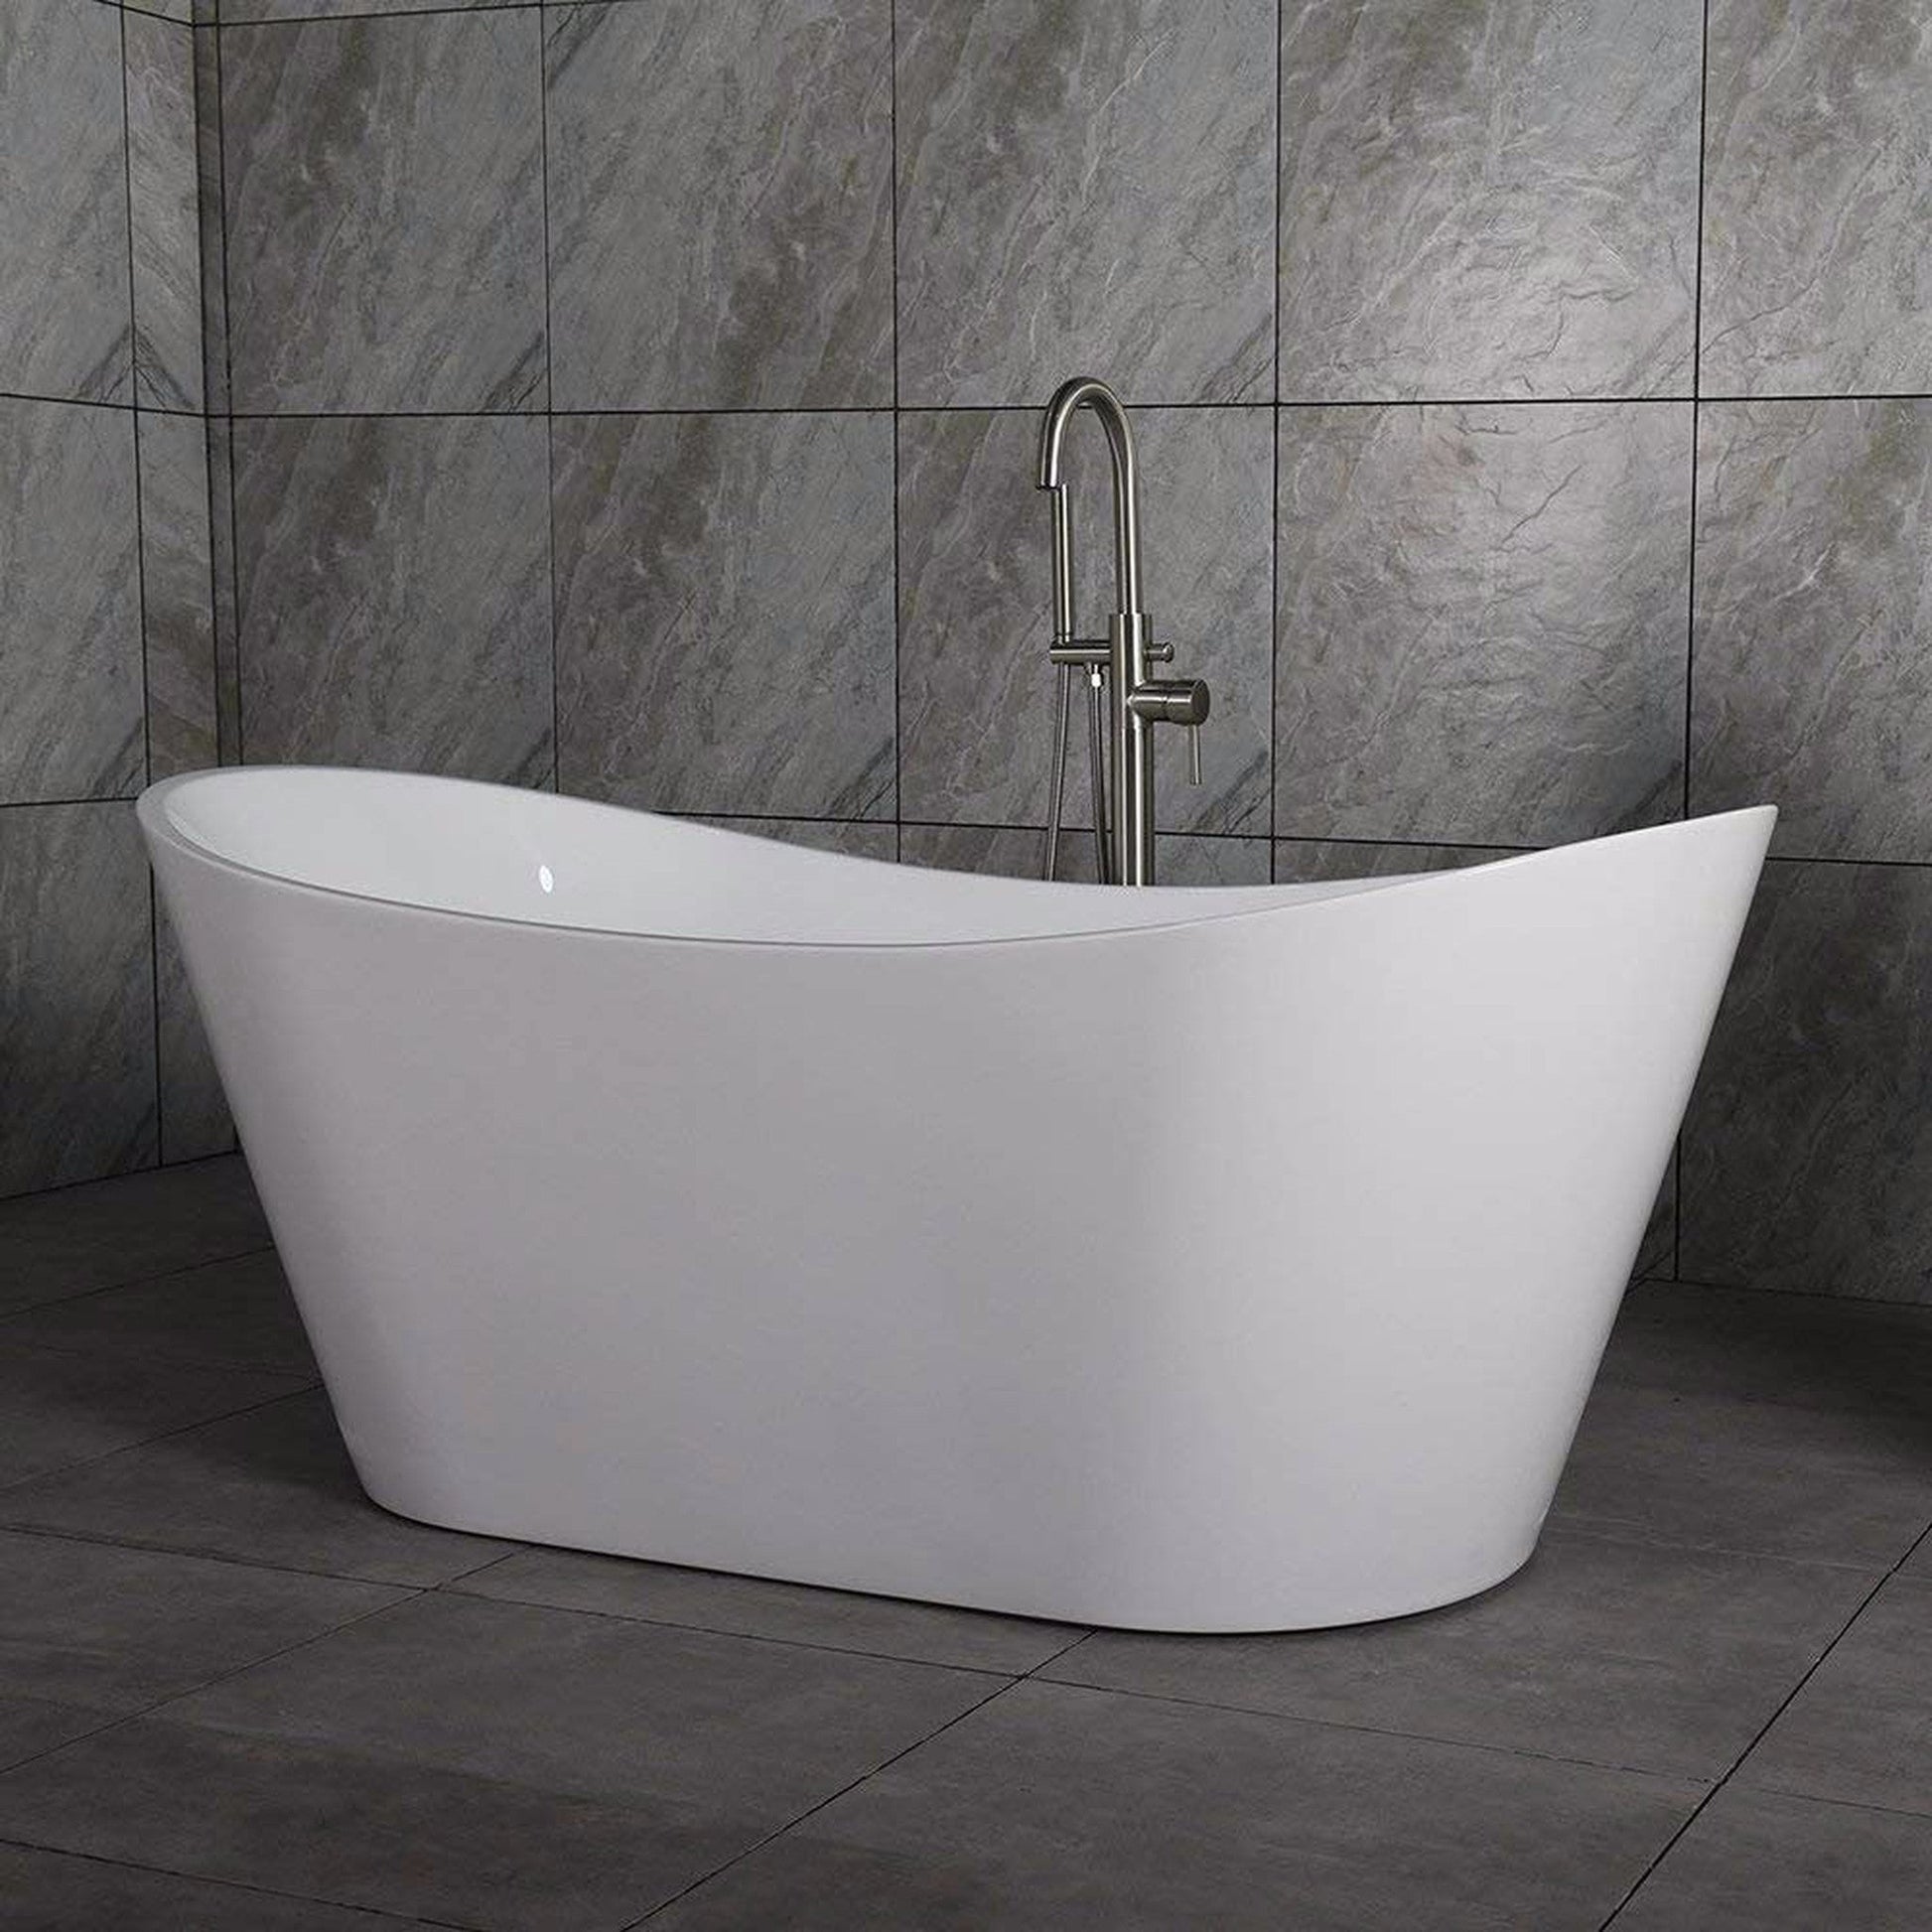 WoodBridge B0010 67" White Acrylic Freestanding Contemporary Soaking Bathtub With Brushed Nickel Drain, Overflow, F0040BN Tub Filler and Caddy Tray